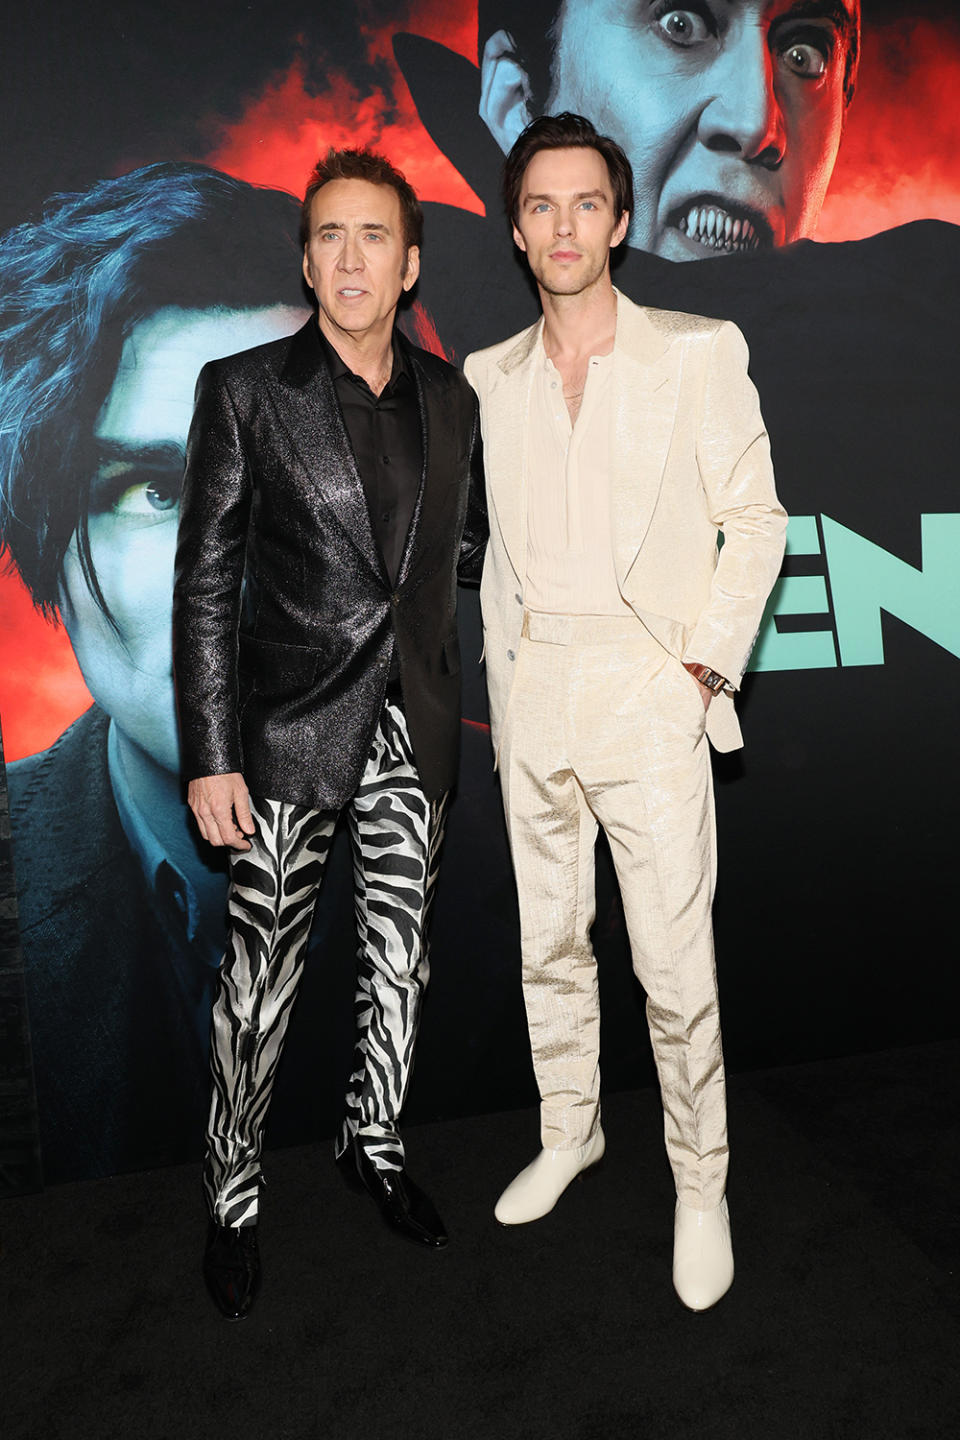 Nicolas Cage and Nicholas Hoult attend the ‘Renfield’ premiere at the Museum of Modern Art in New York City on March 28, 2023.